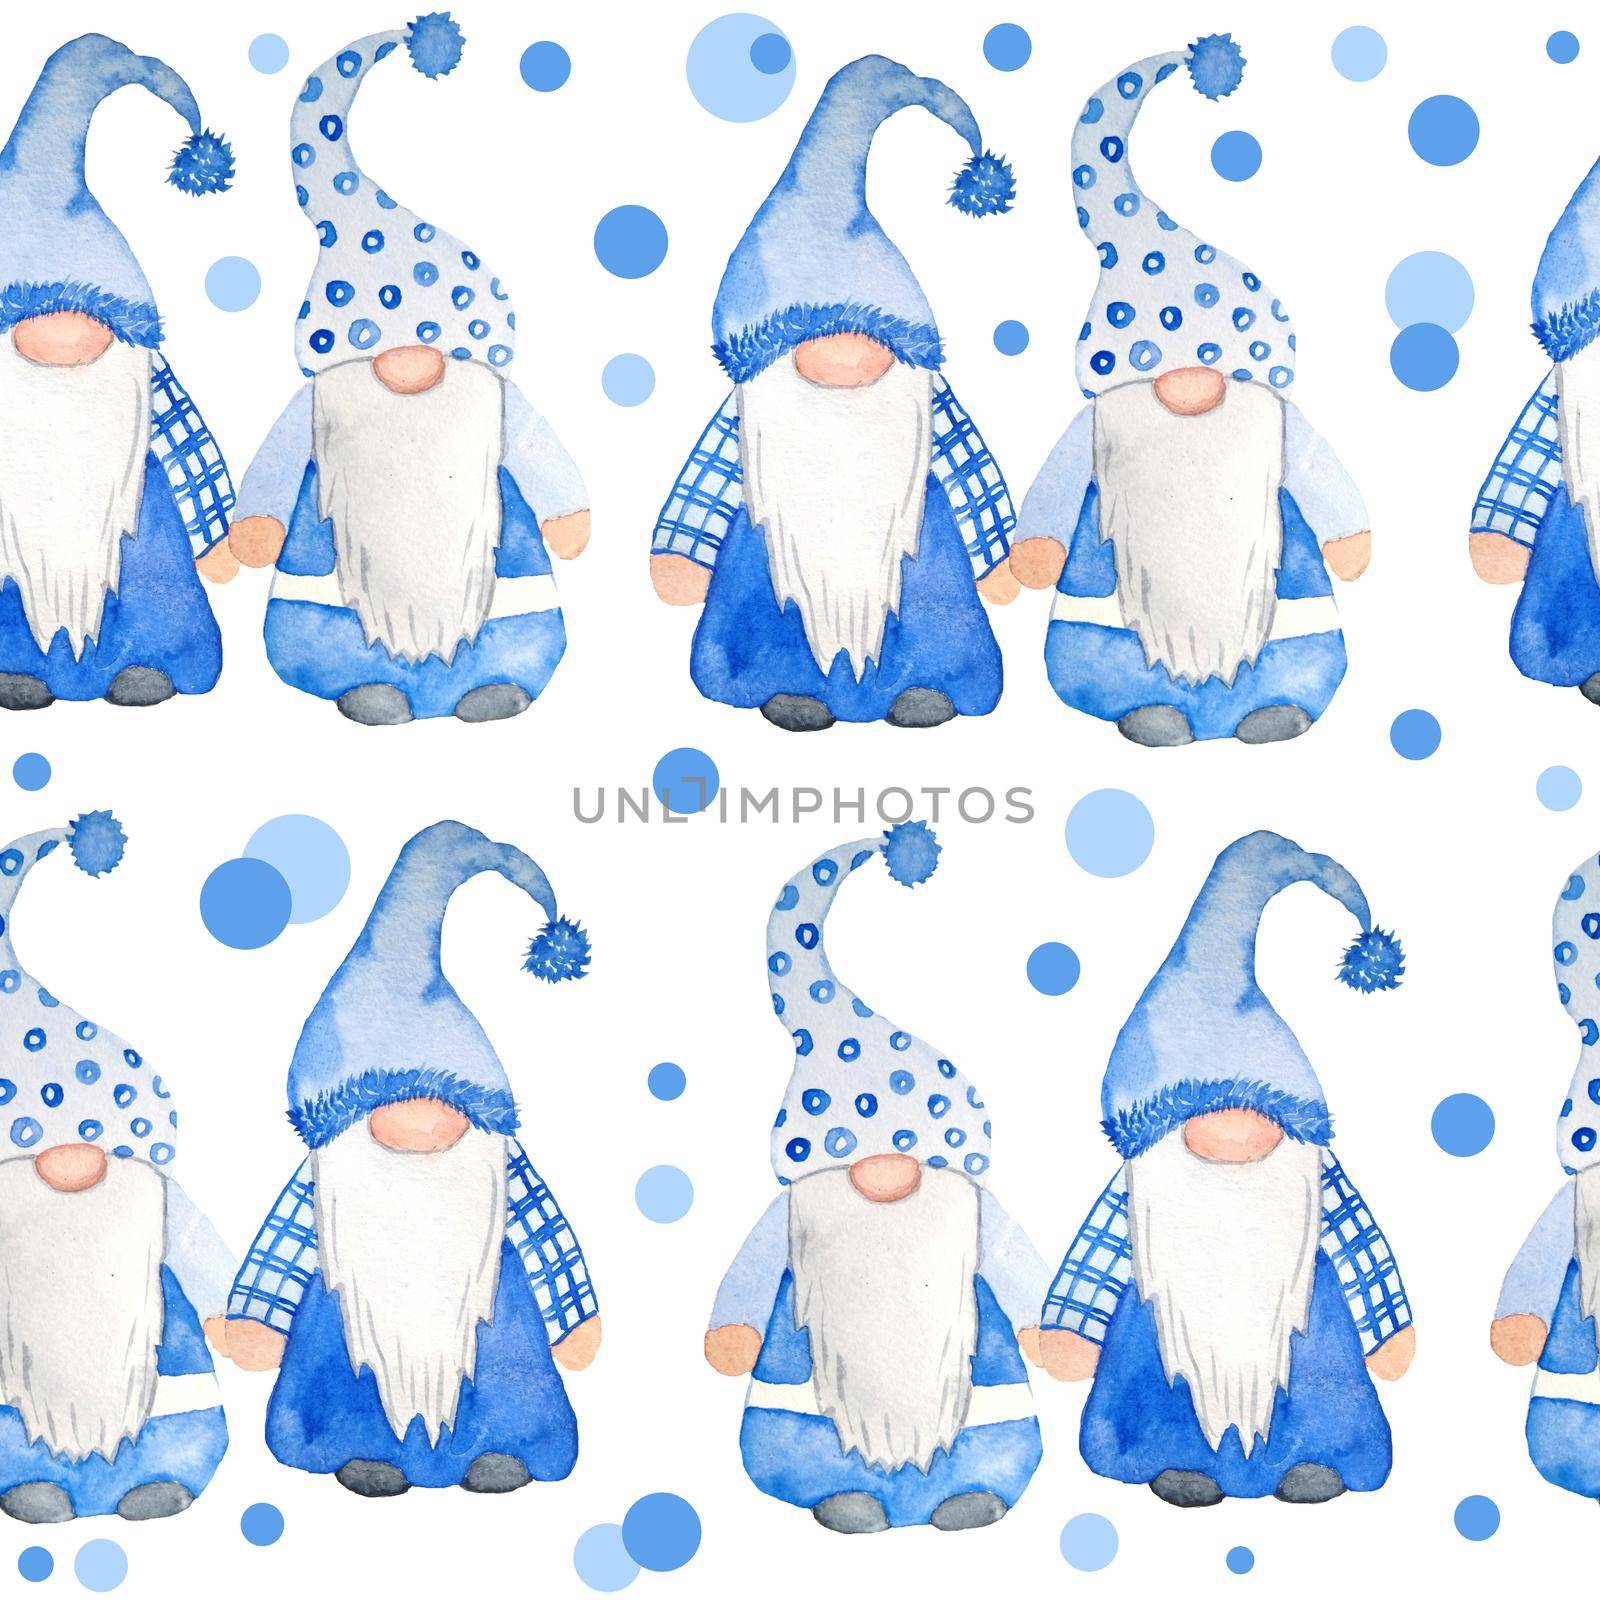 Watercolor hand drawn seamless pattern nordic scandinavian gnomes for christmas decor tree. New year illustration in blue grey polka dot background. Funny winter character north swedish elf in hat beard. Greeting card. by Lagmar